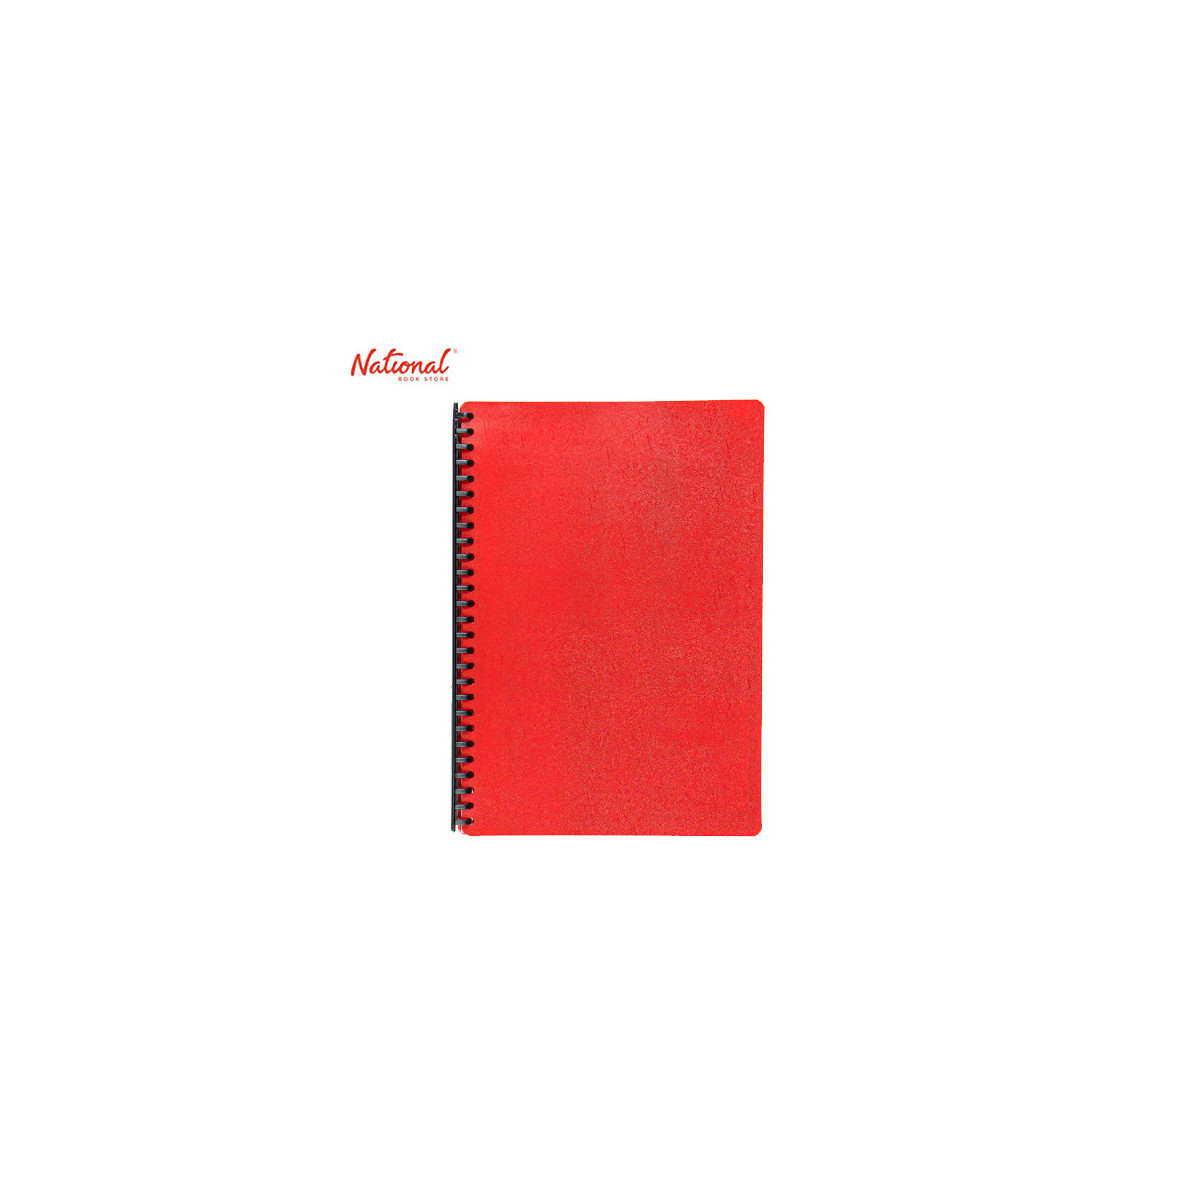 SEAGULL CLEARBOOK REFILLABLE 2027  LONG 20SHEETS 27HOLES SOLID COLOR RED